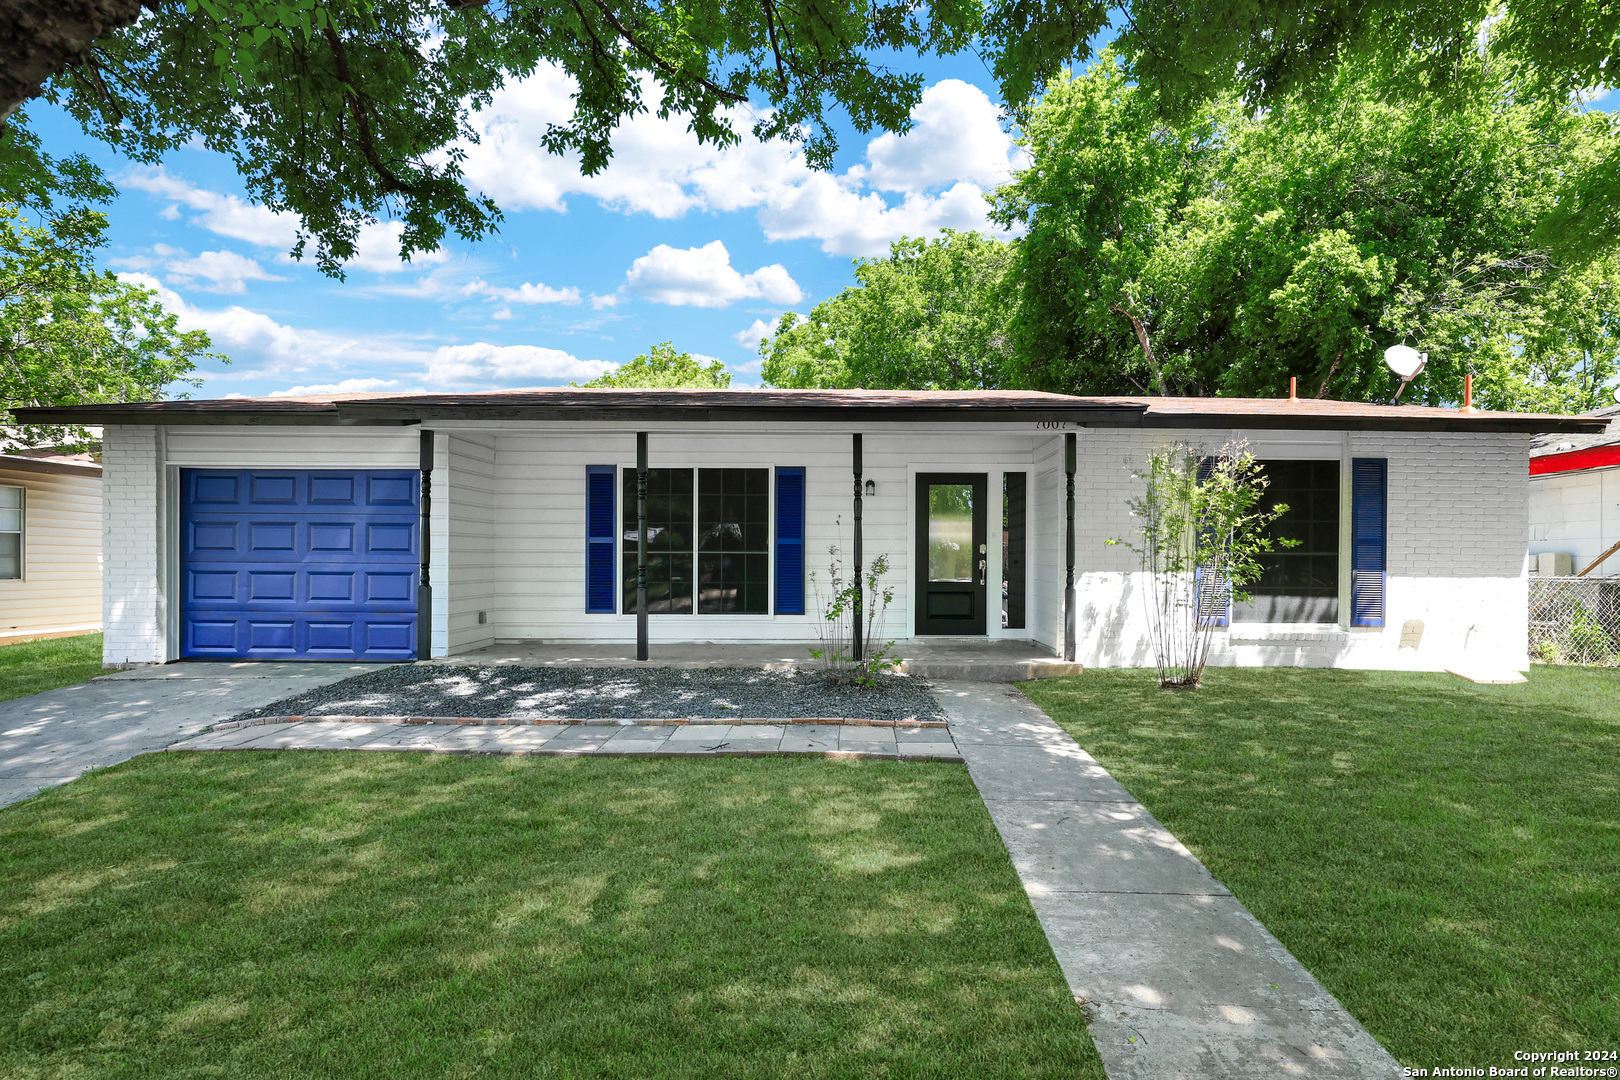 Photo of 7007 Butterfield Dr in San Antonio, TX